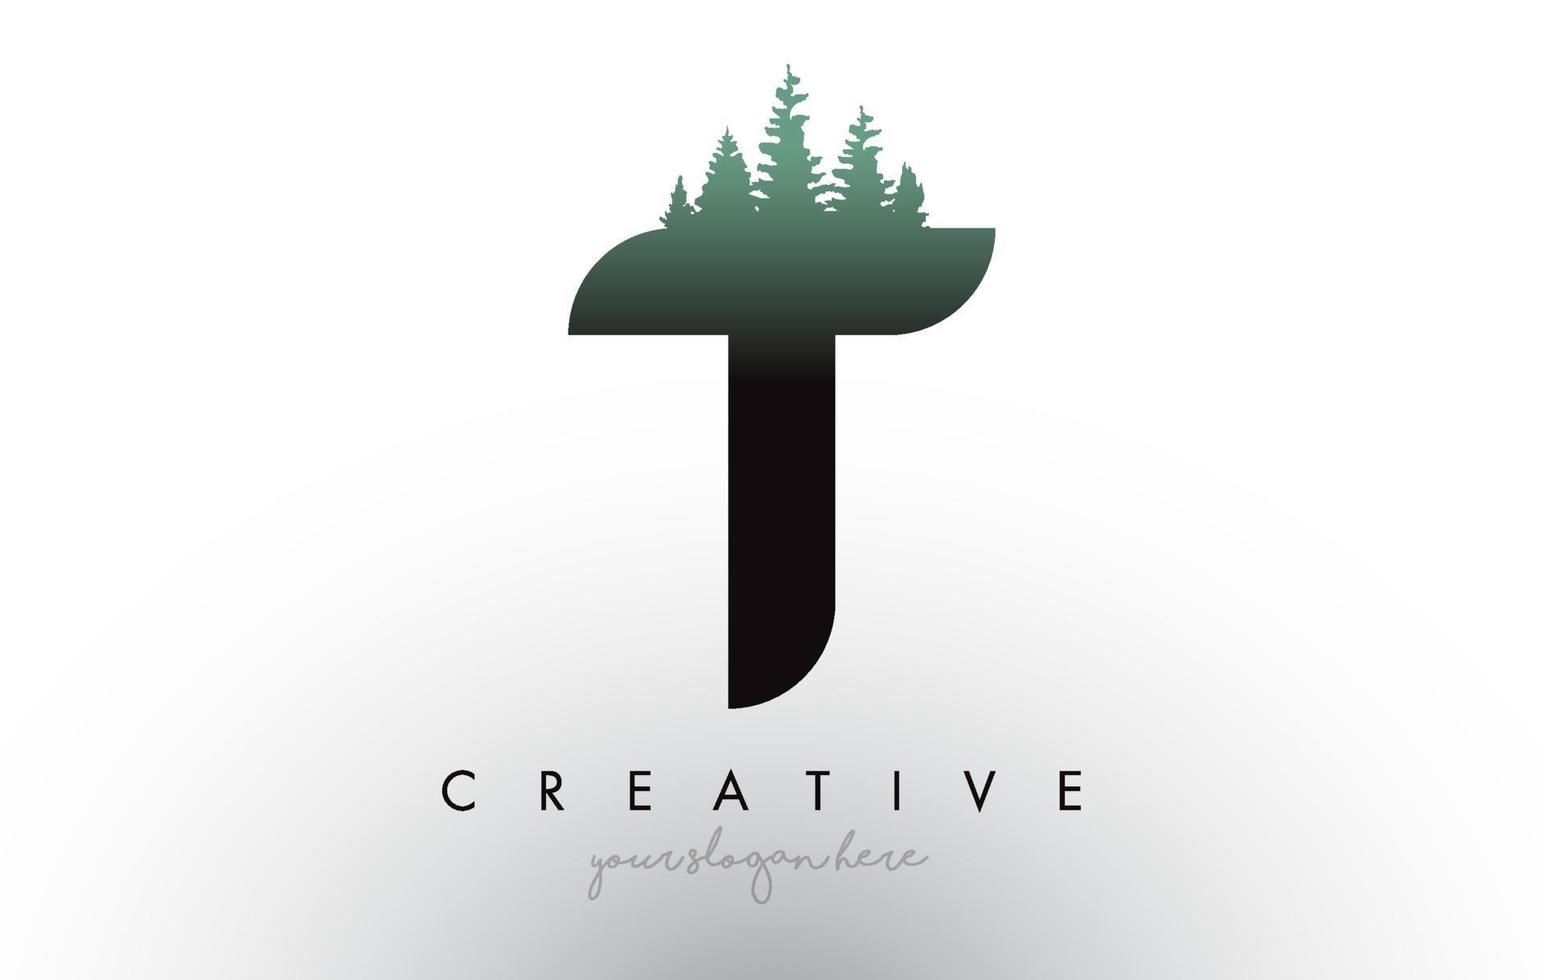 Creative T Letter Logo Idea With Pine Forest Trees. Letter T Design With Pine Tree on Top vector